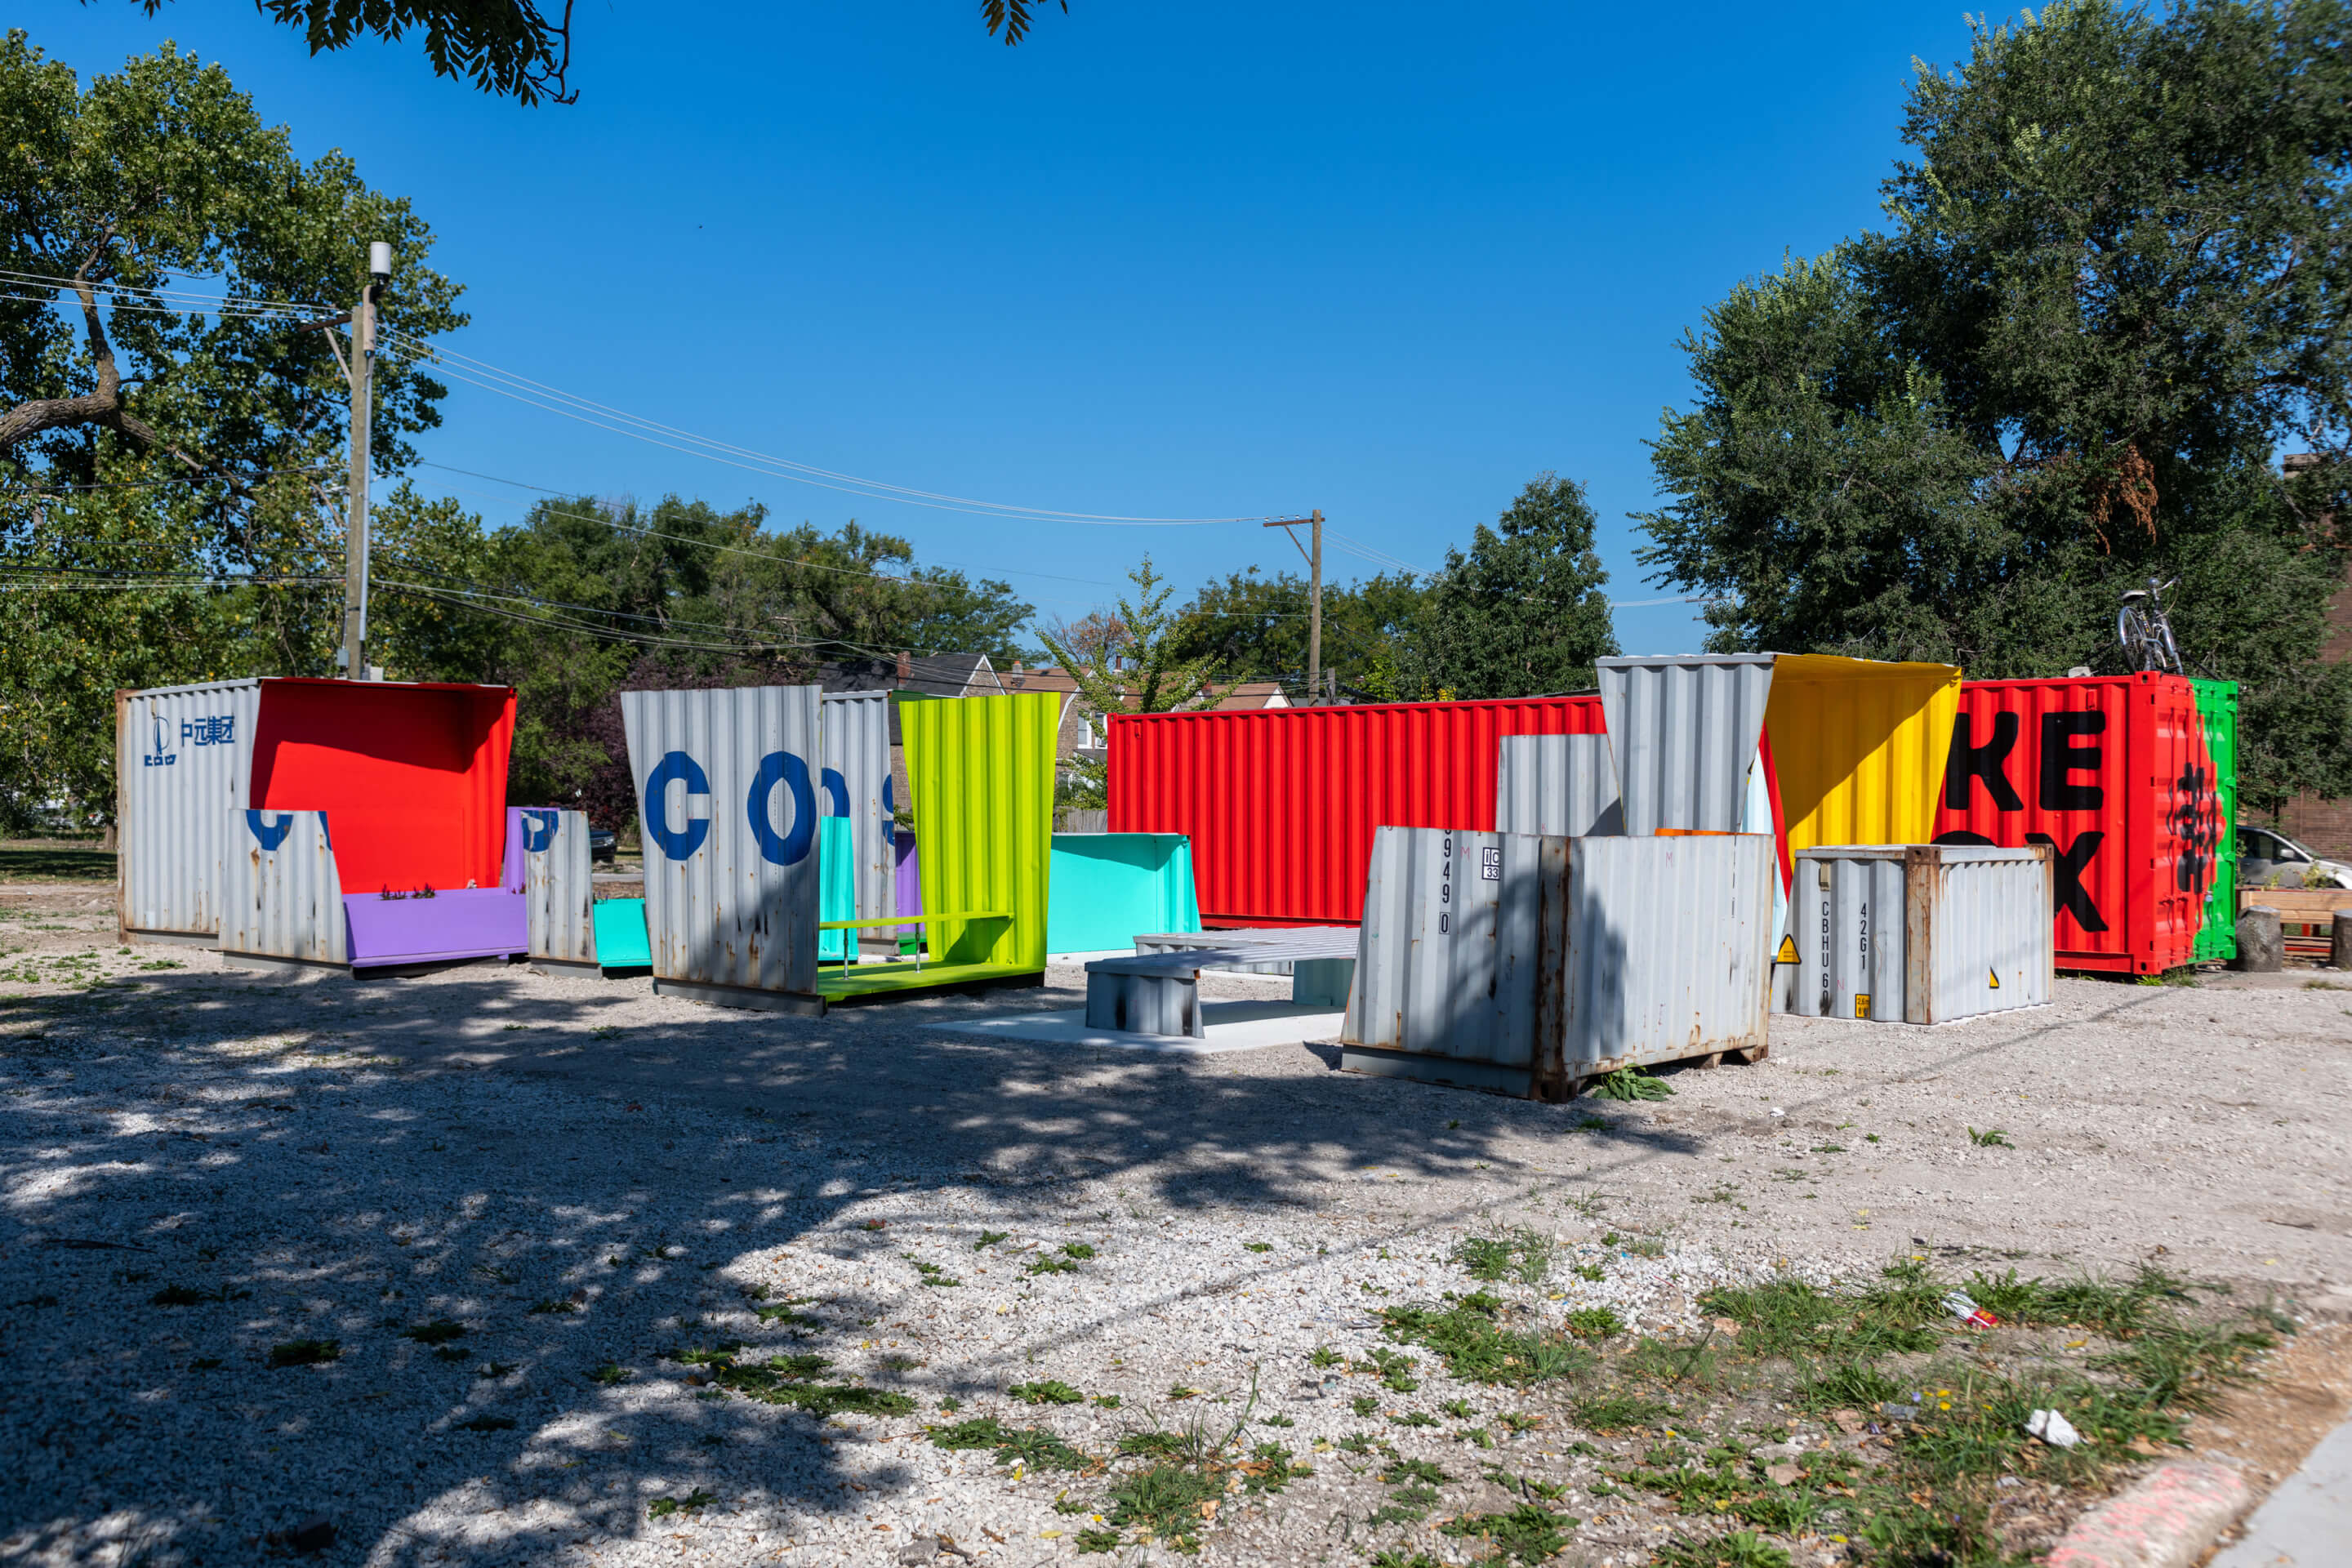 At The Available City, a row of colorful metal walls